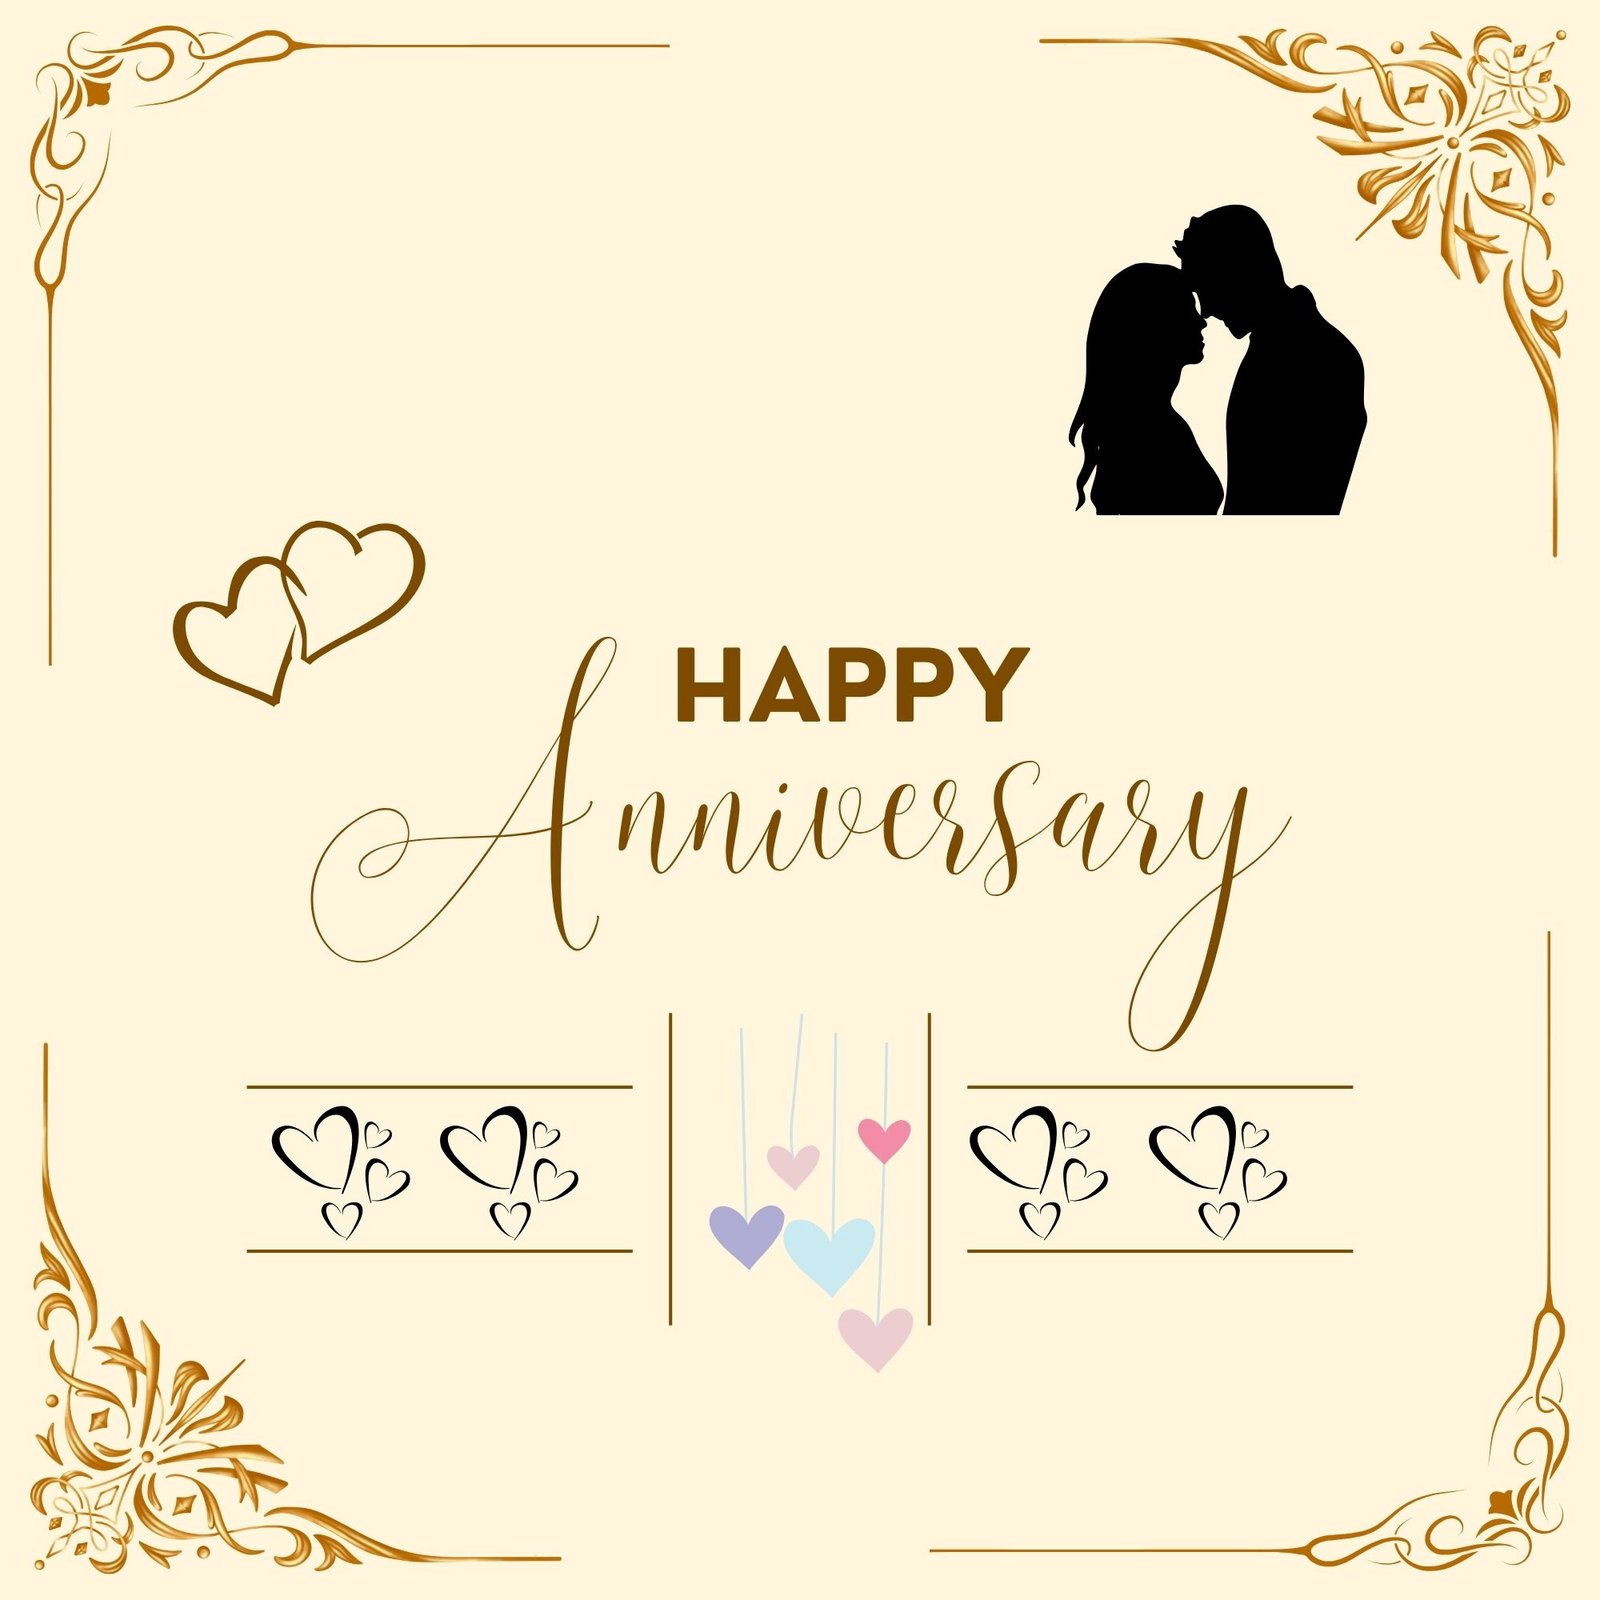 Happy Anniversary Images For Husband